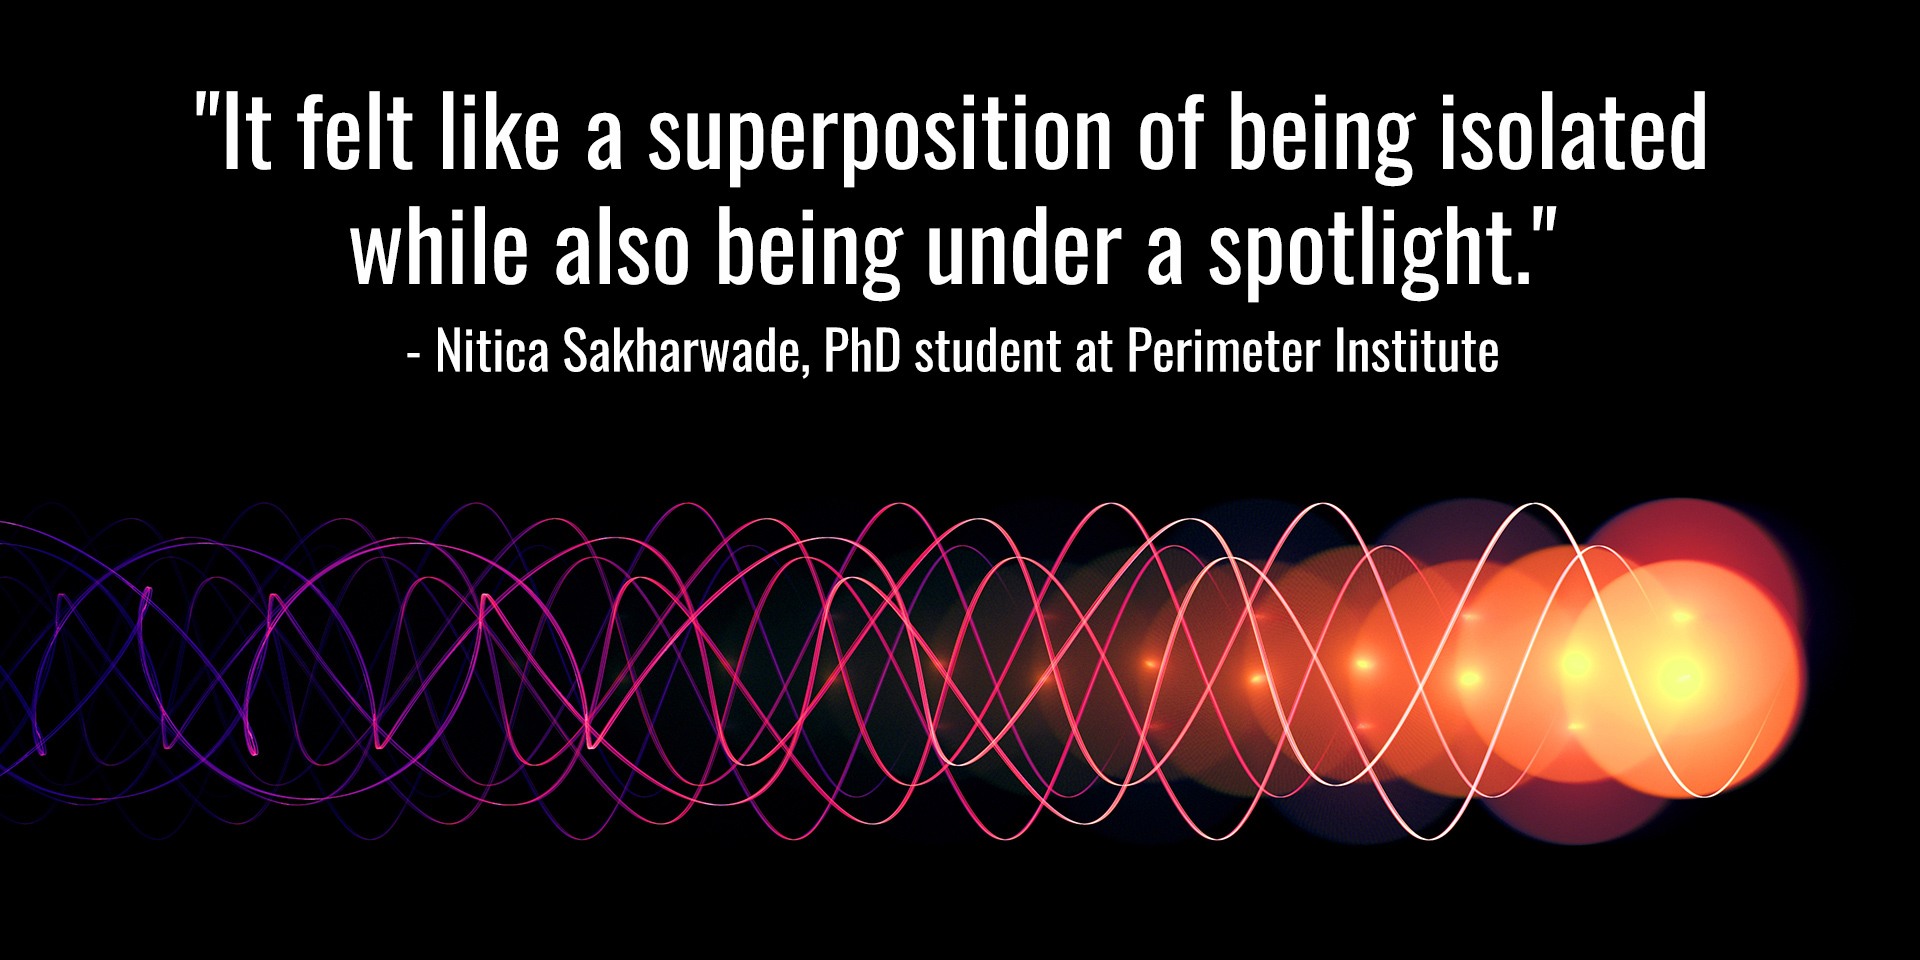 "It felt like a superposition of being isolated while also being under a spotlight." Nitica Sakharwade, PhD student at Perimeter Institute